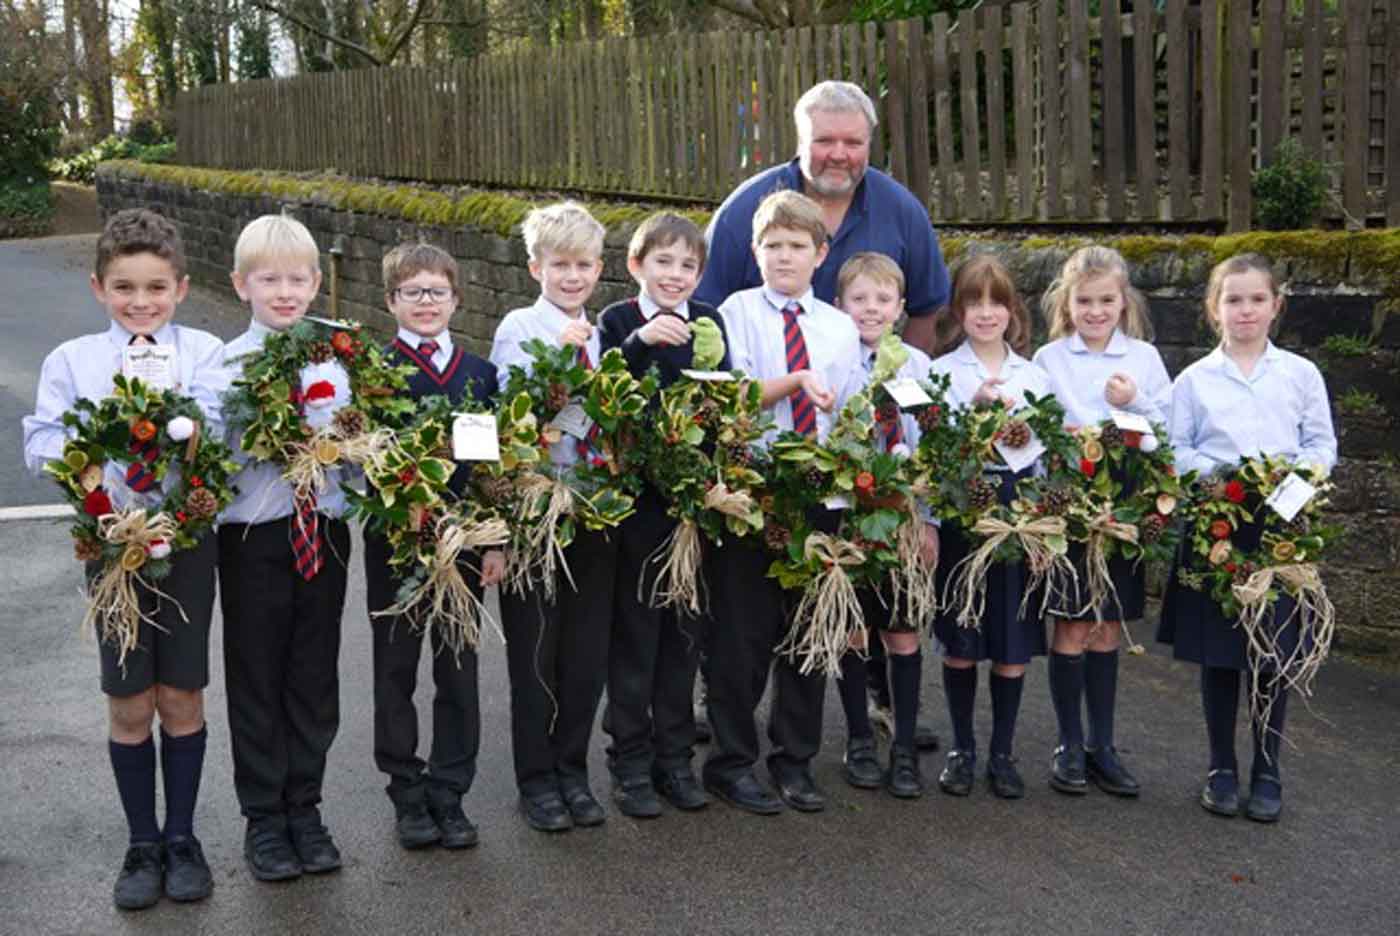 Youngsters at ‘outstanding’ Harrogate prep school Belmont Grosvenor have been getting into the Christmas spirit with the help of local charity Horticap